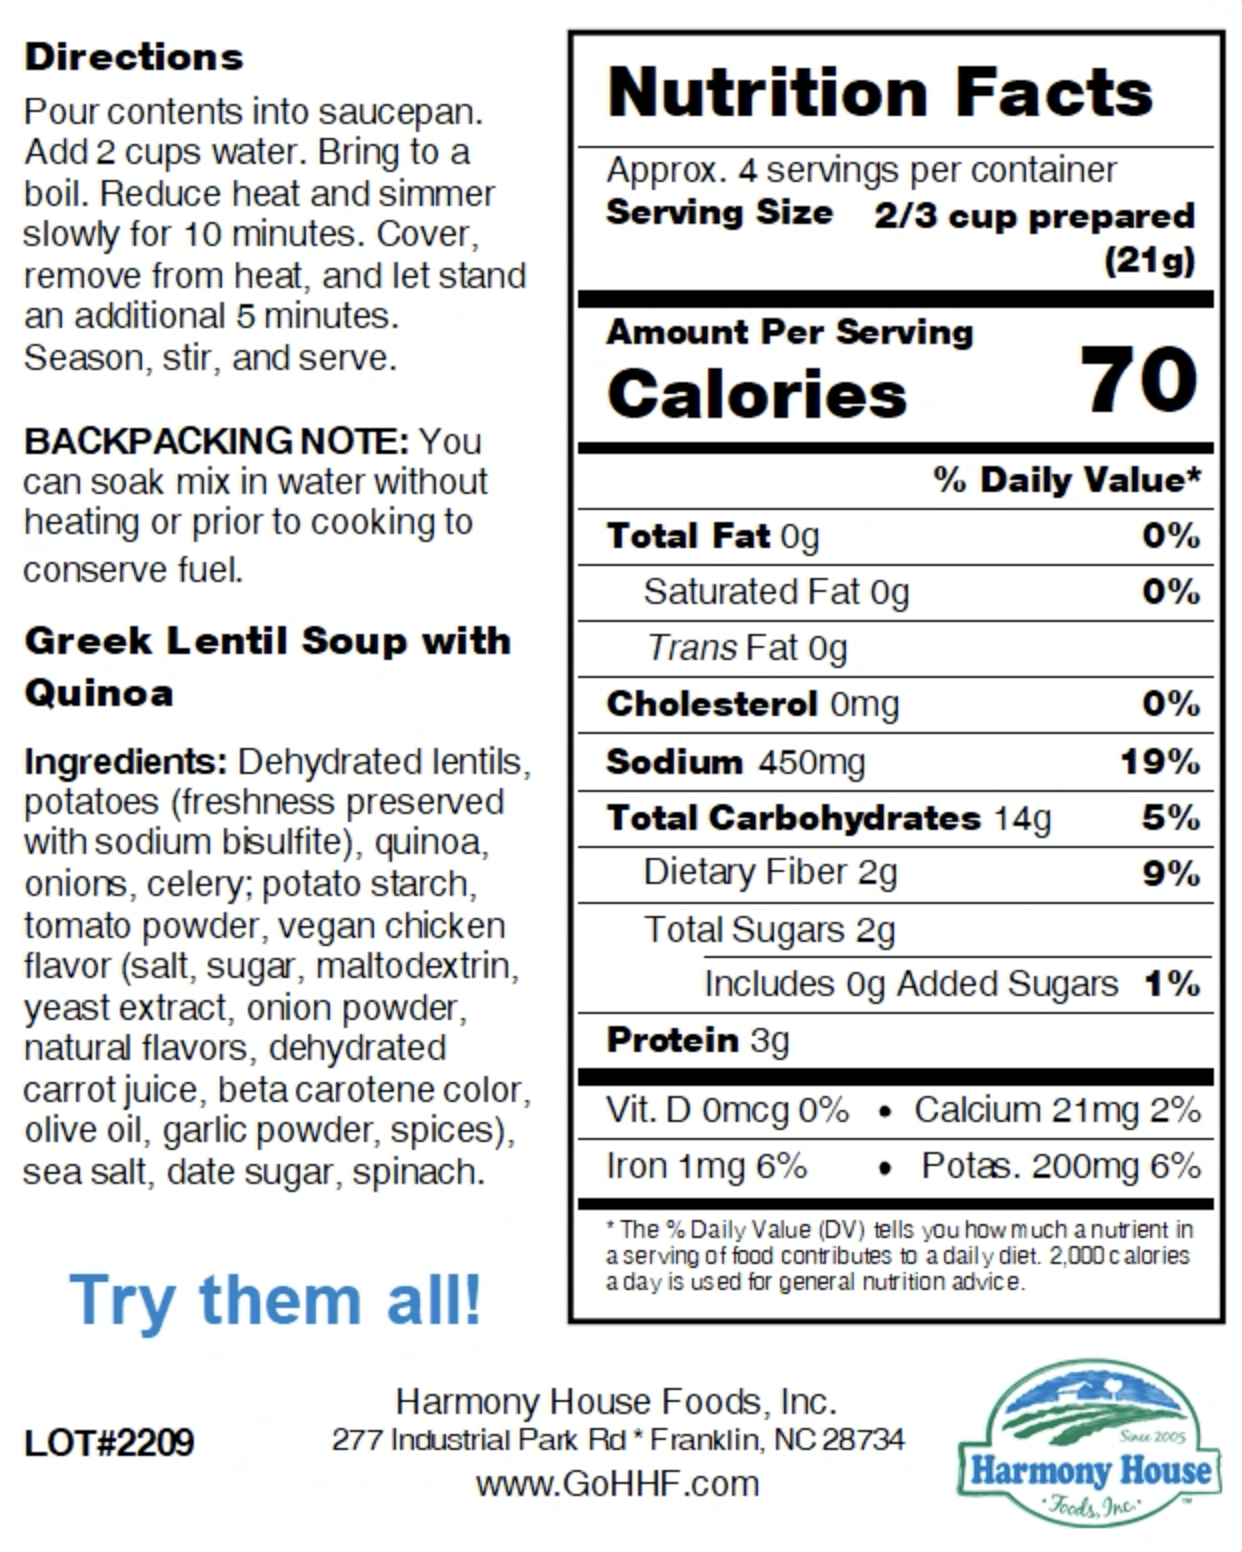 A nutrition label for a Harmony House Greek Lentil Soup with Quinoa.